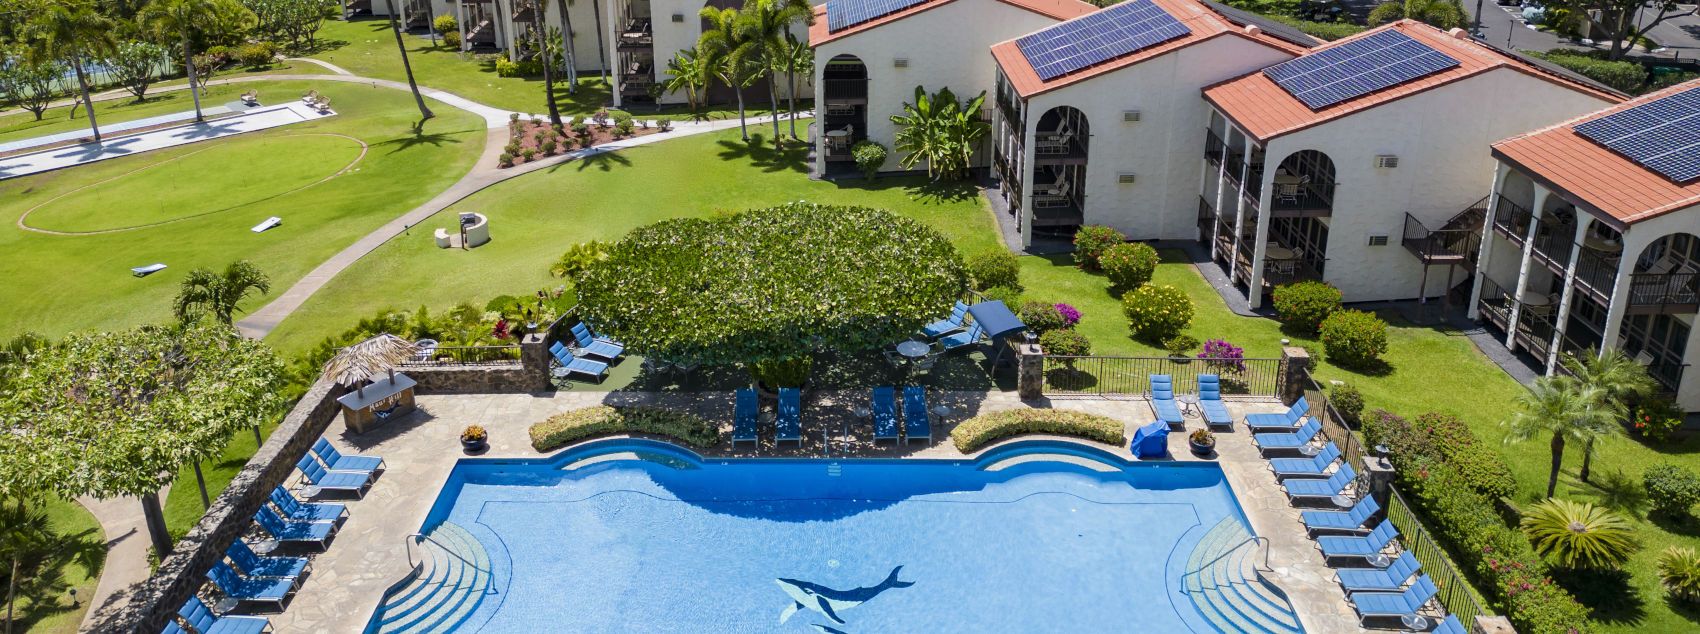 Property view of Maui Hill showing pool, blue padded lounge chairs, lush green trees and plants, builds and ocean in the background